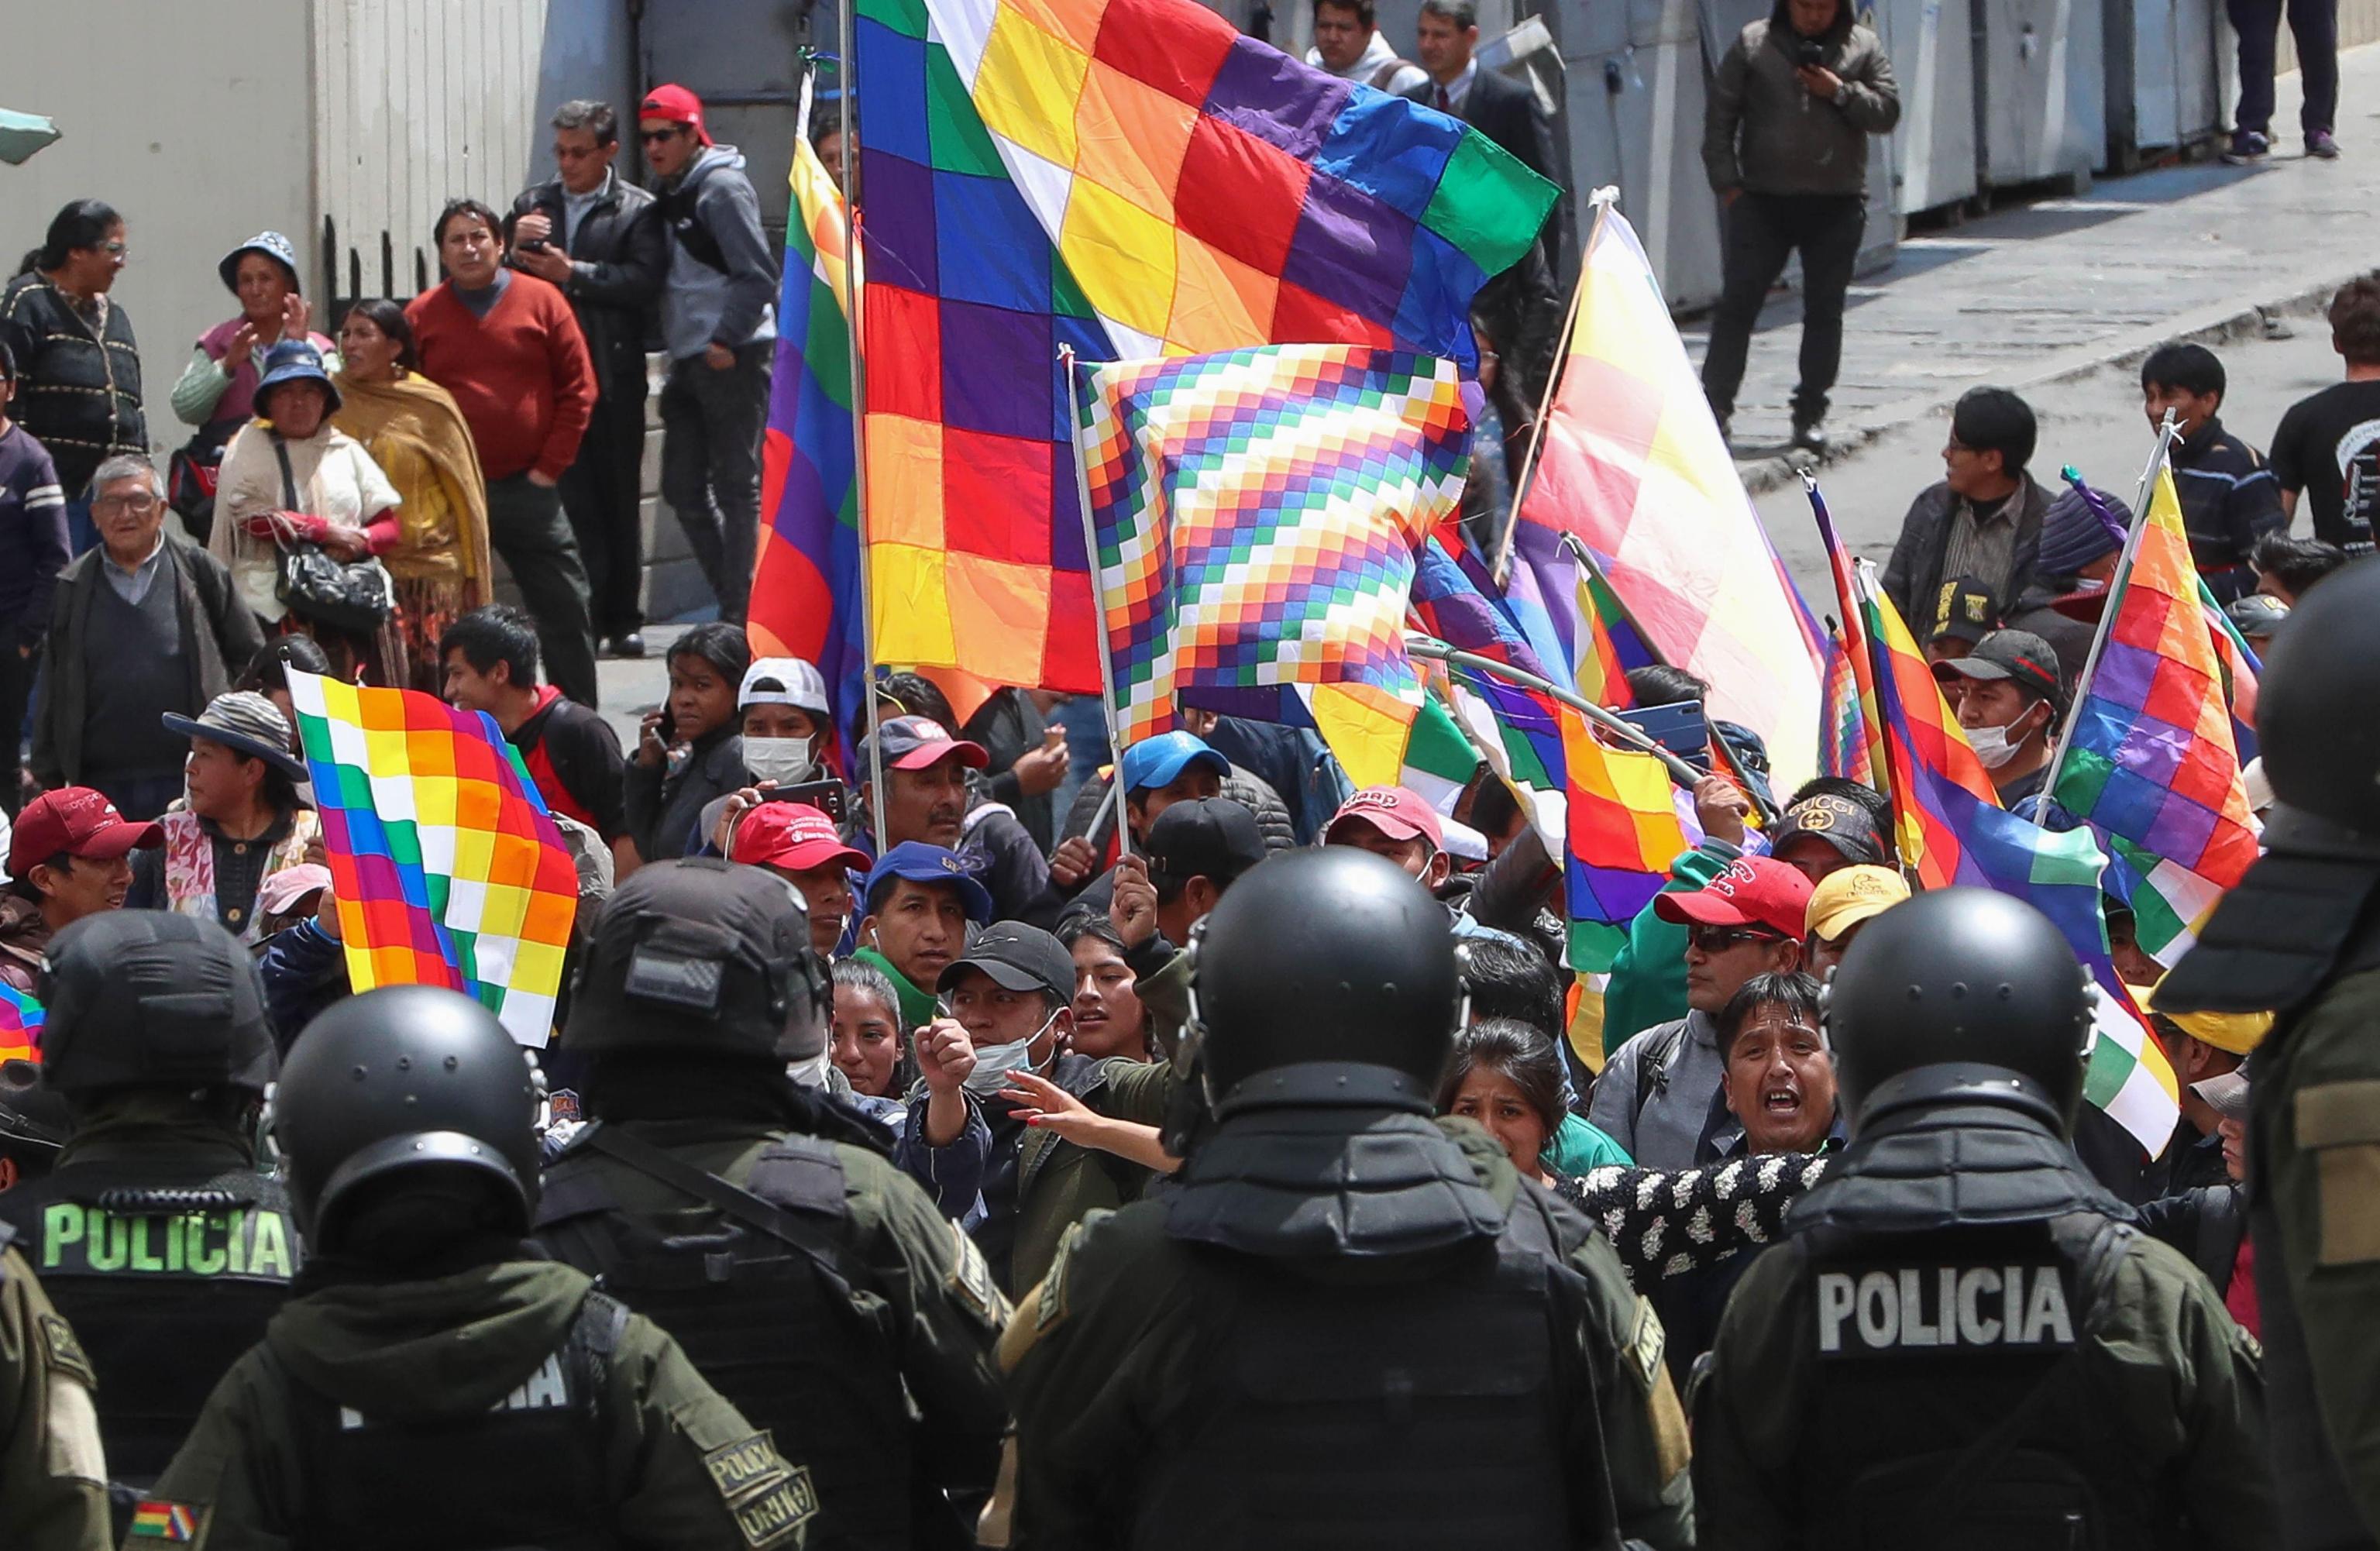 epa08000419 El Alto citizens along with supporters of former President Evo Morales march while Bolivian military and police guard the surroundings of Plaza Murillo, in La Paz, Bolivia 15 November 2019. Bolivia is plunged into a crisis after the elections of October 20, with at first opposition protests against Evo Morales over allegations of fraud to achieve his fourth consecutive term, and now after his resignation Morales supporters protesting against the interim government of Jeanine ÃÃ±ez.  EPA/MartÃ­n Alipaz